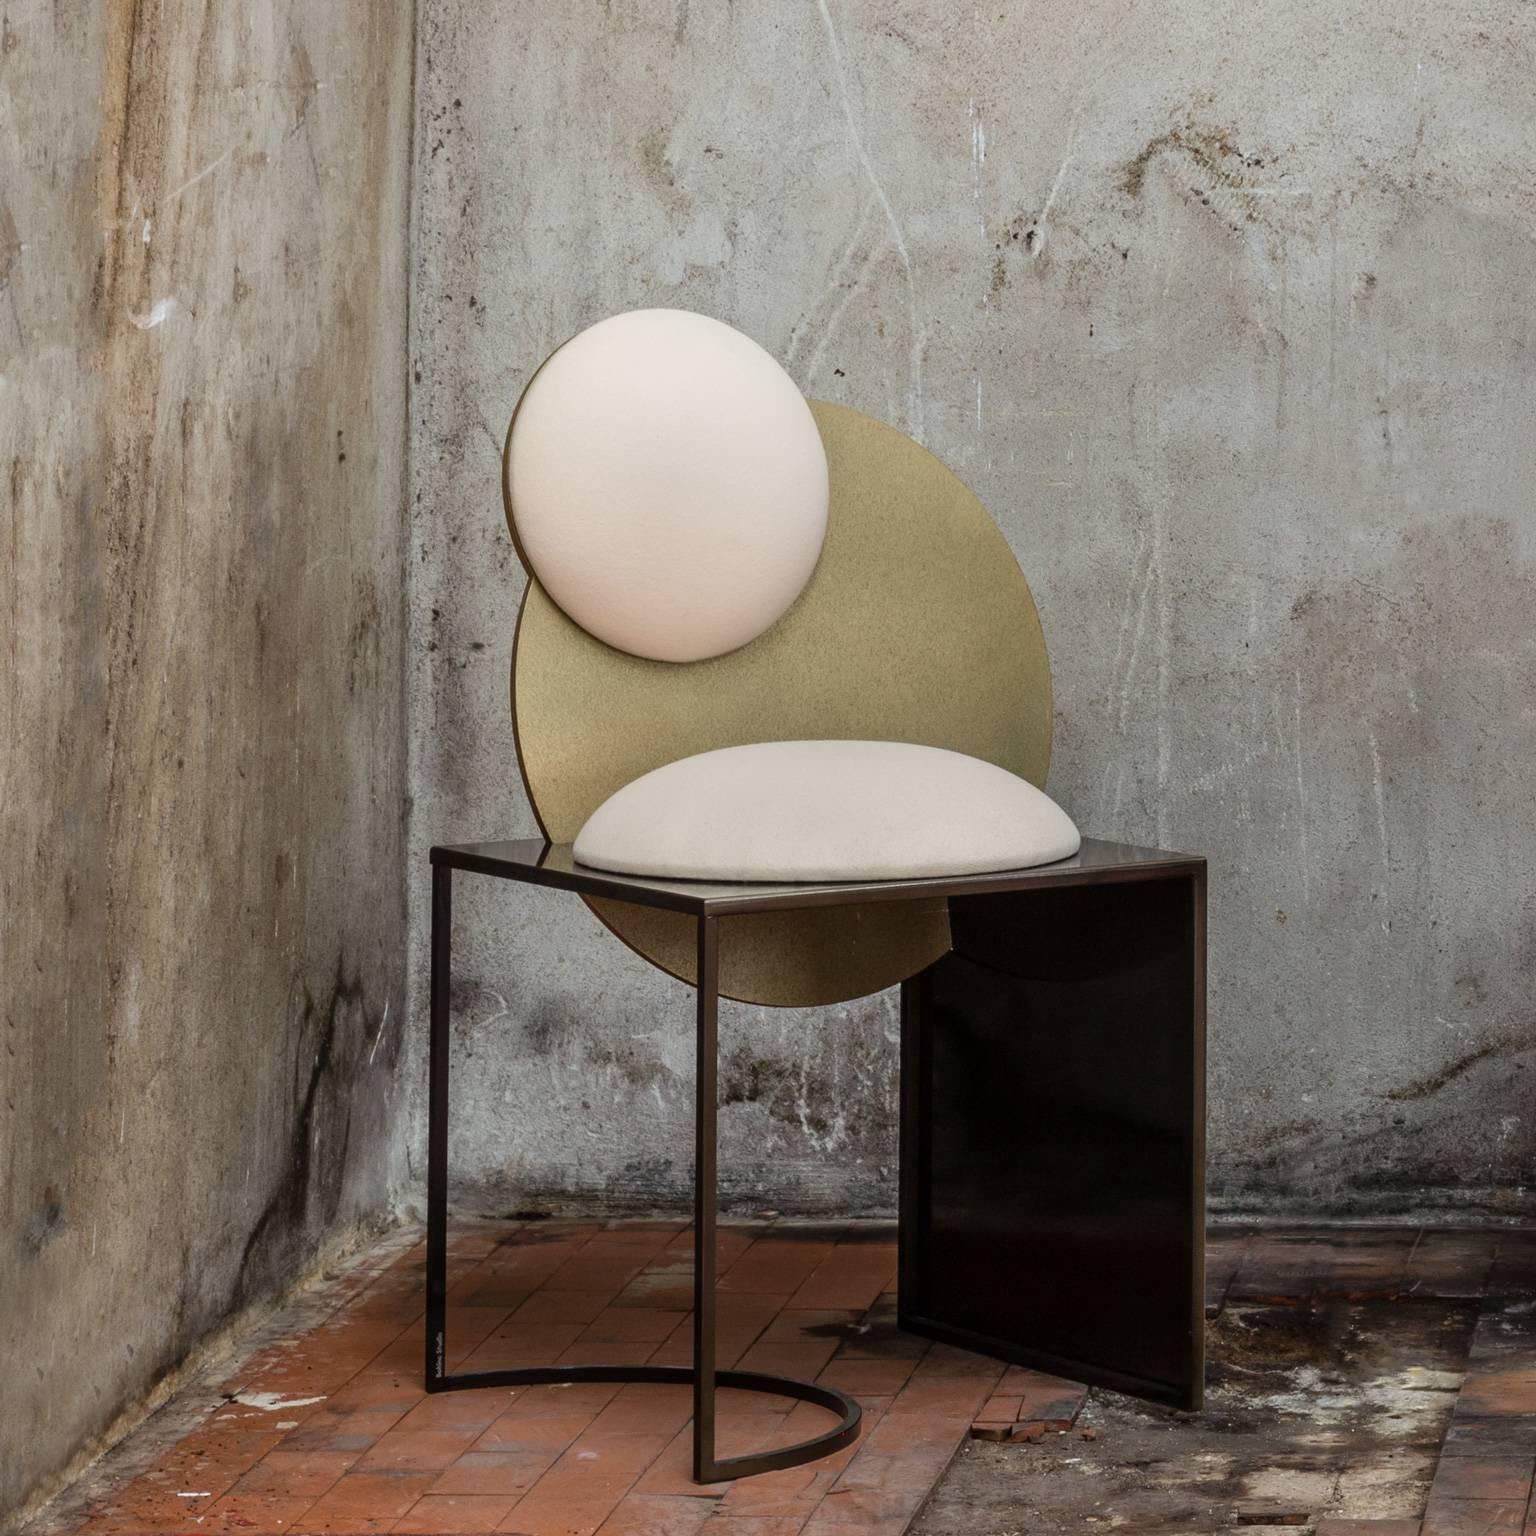 Celeste Chair in White Fabric and Metal, by Lara Bohinc, in Stock 5